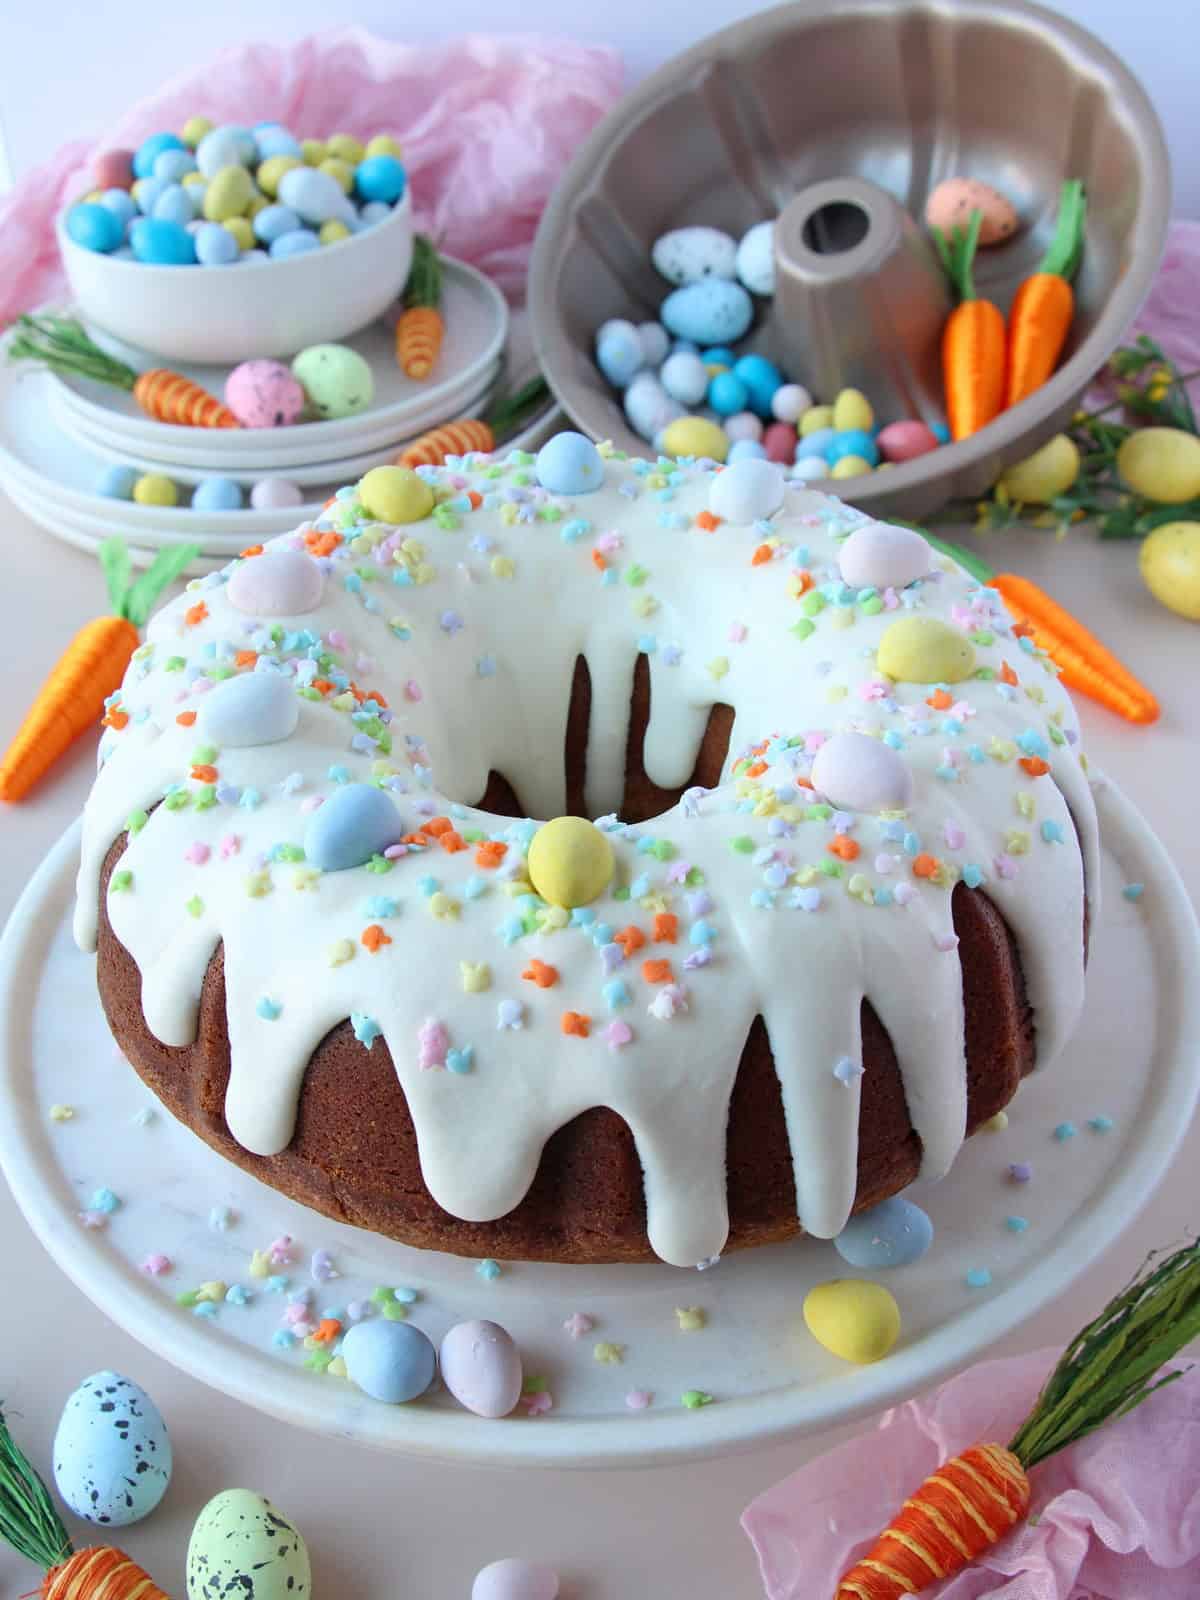 Easter bundt cake glazed with cream cheese and topped with chocolate hershey eggies. Behind plates filled with eggies and colourful easter decoration